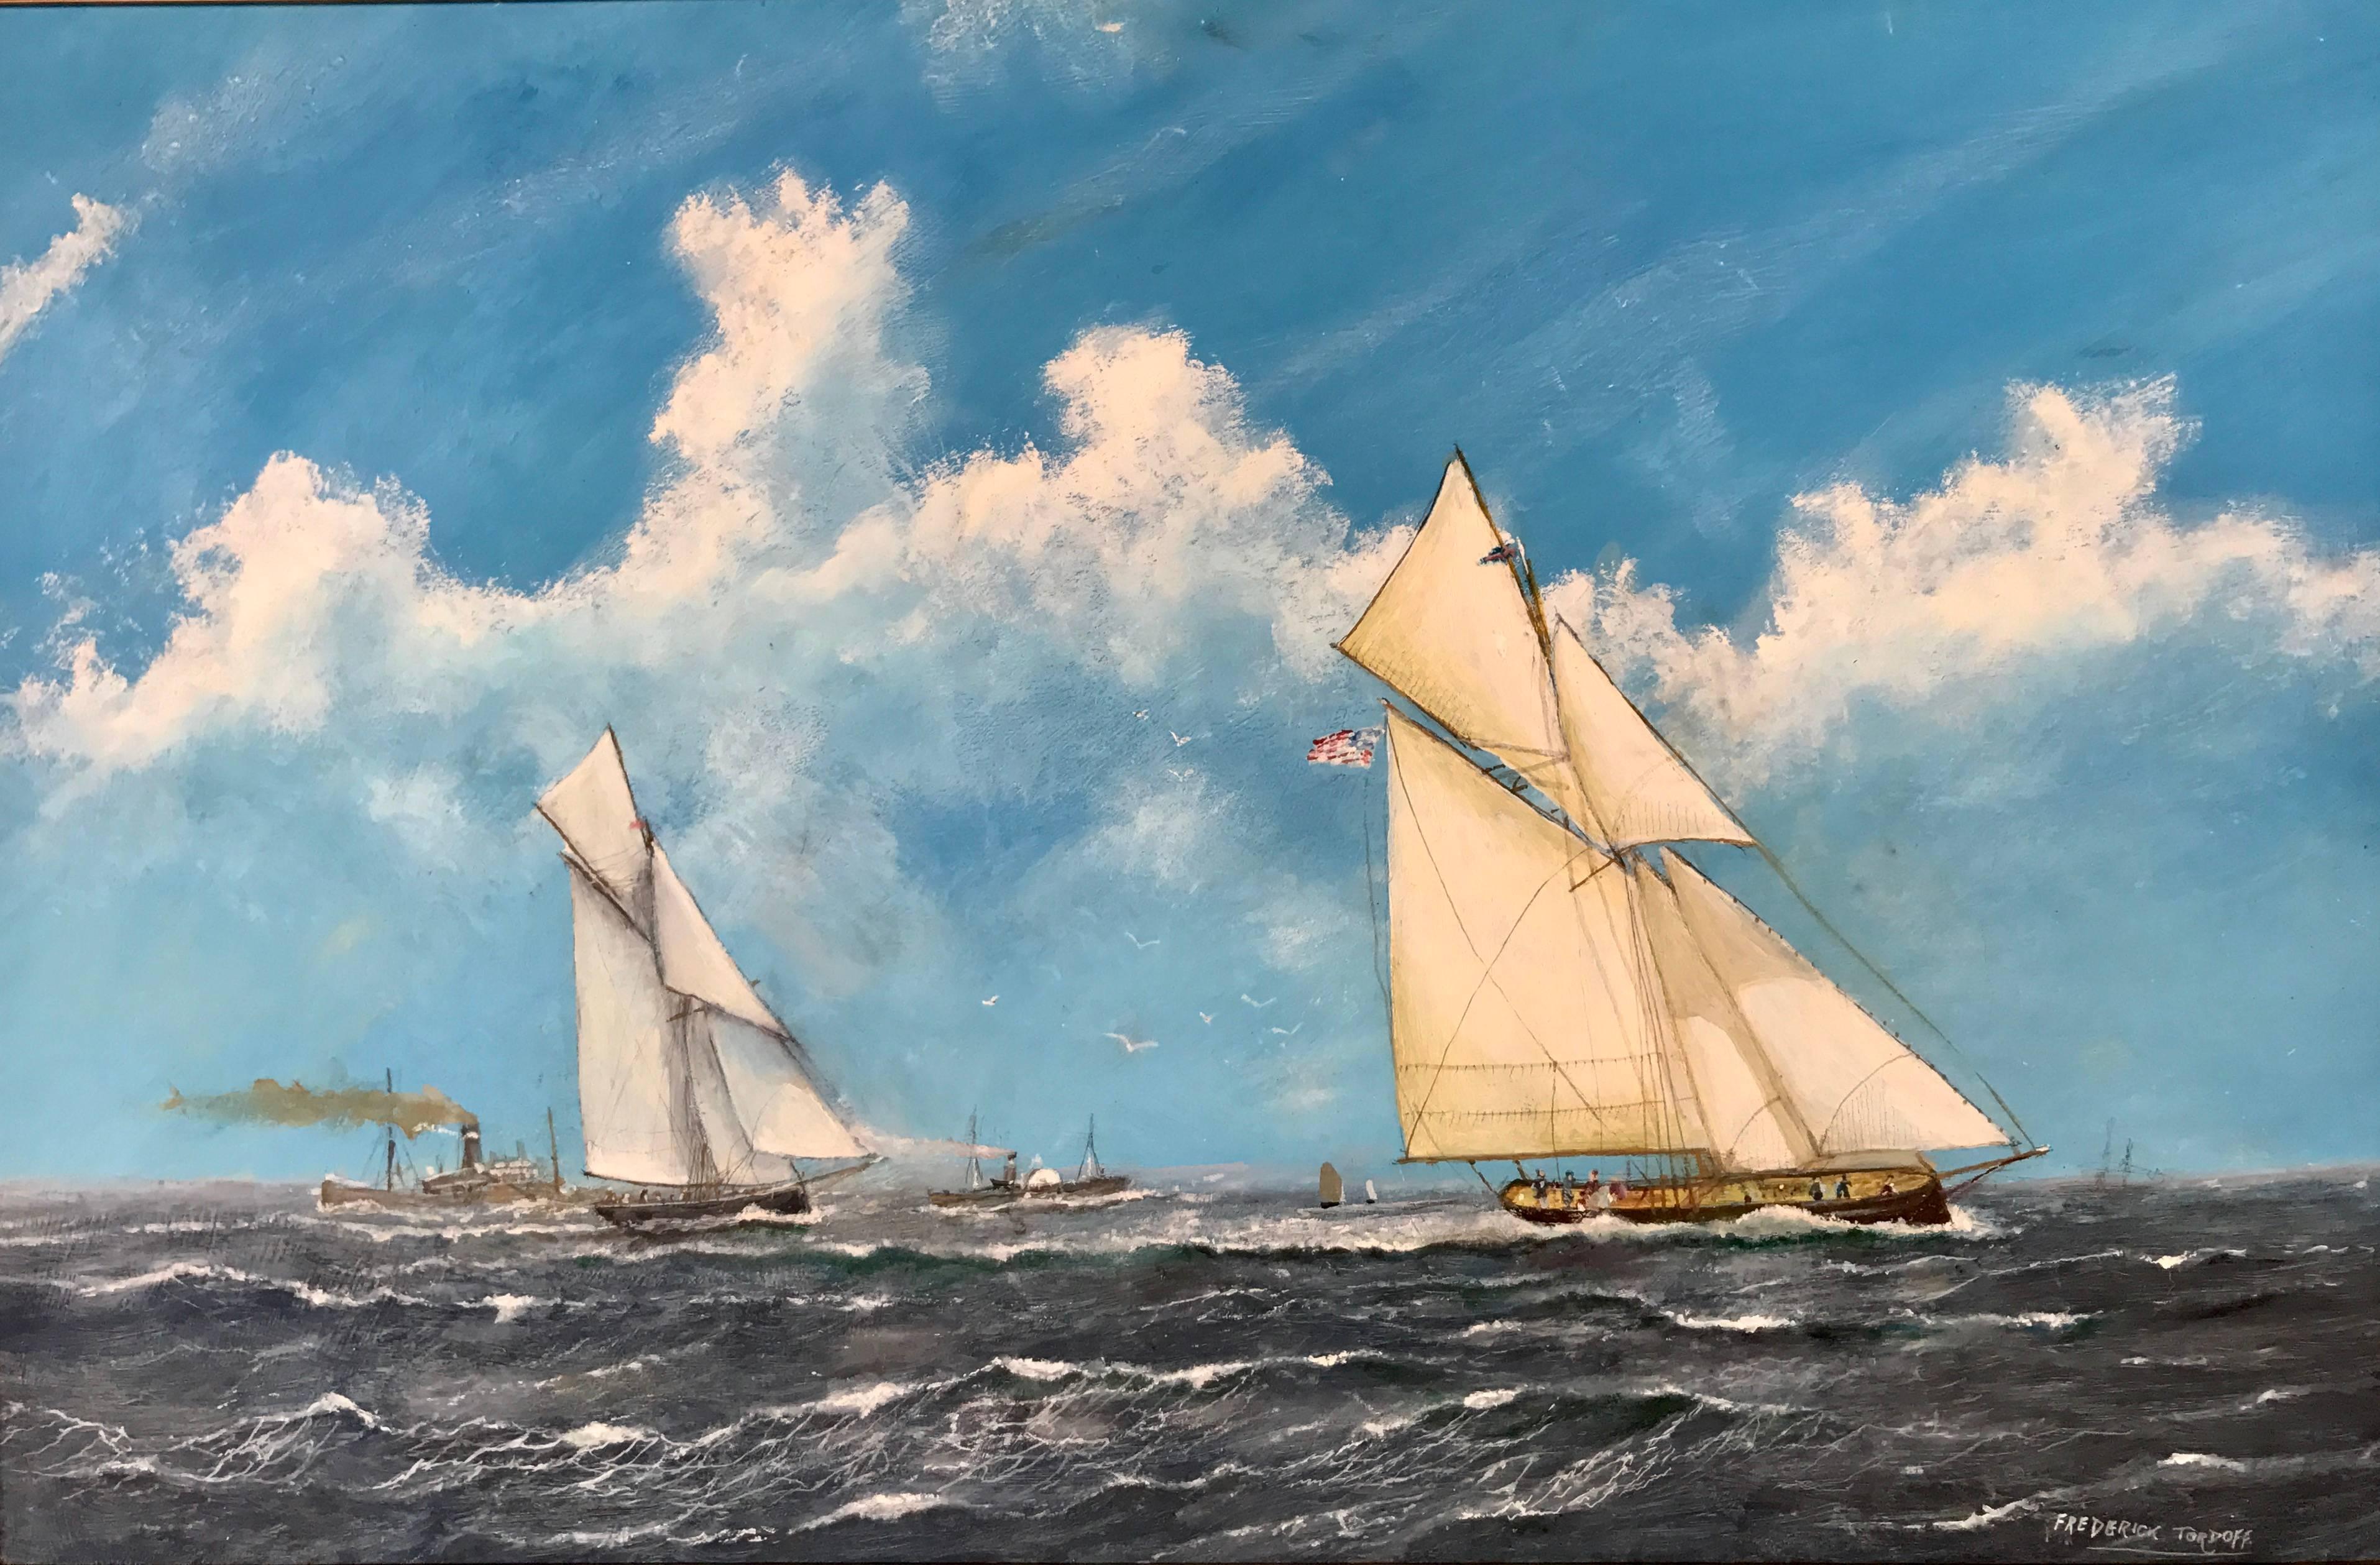 Frederick Tordoff Landscape Painting - "American Cup Race 1885"